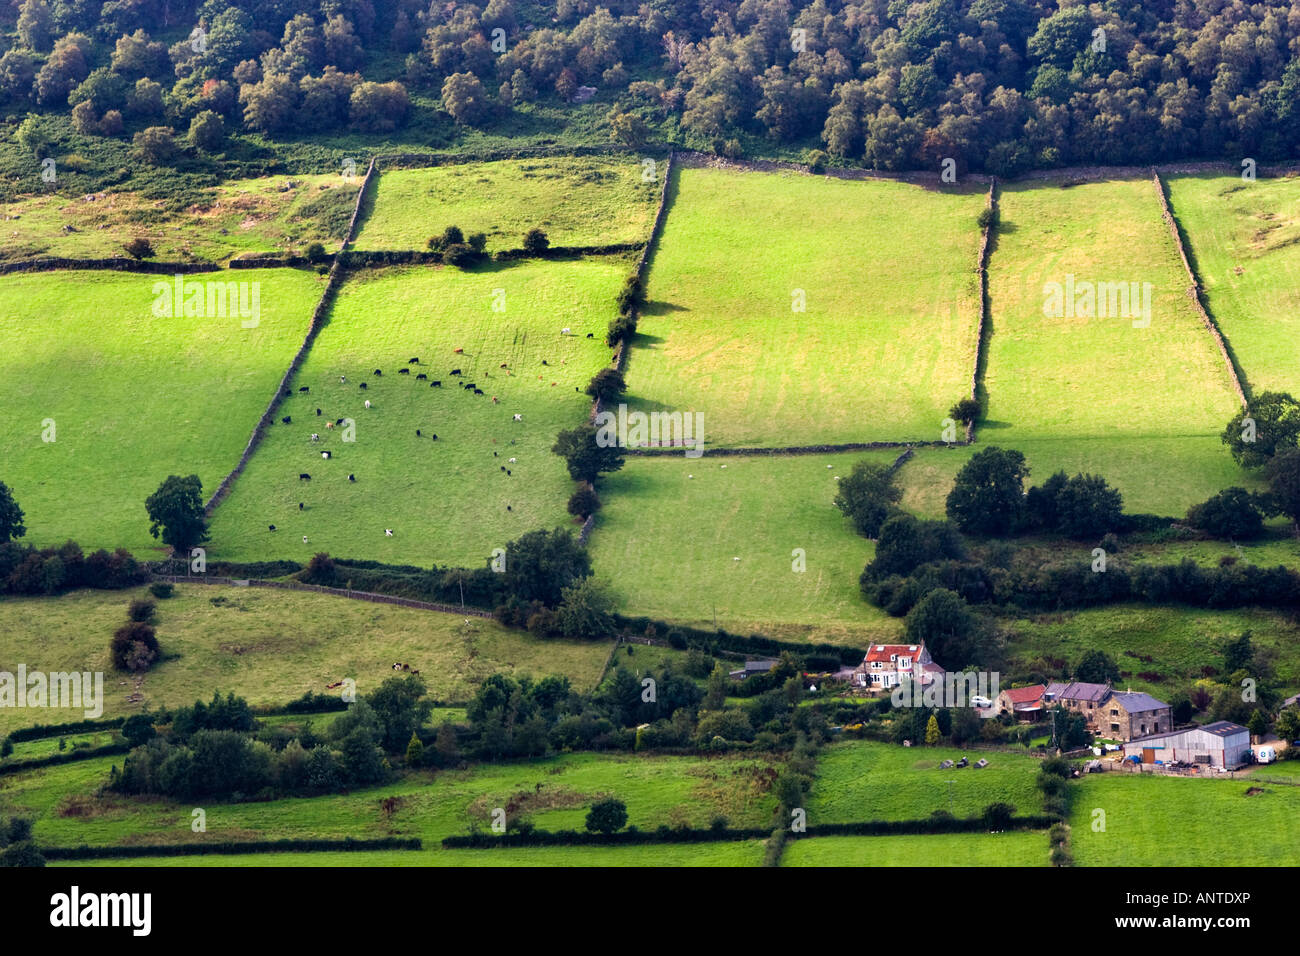 Farm and fields in Great Fryupdale valley, North York Moors National Park. Sheep and cows are grazing in on one of the fields. Stock Photo